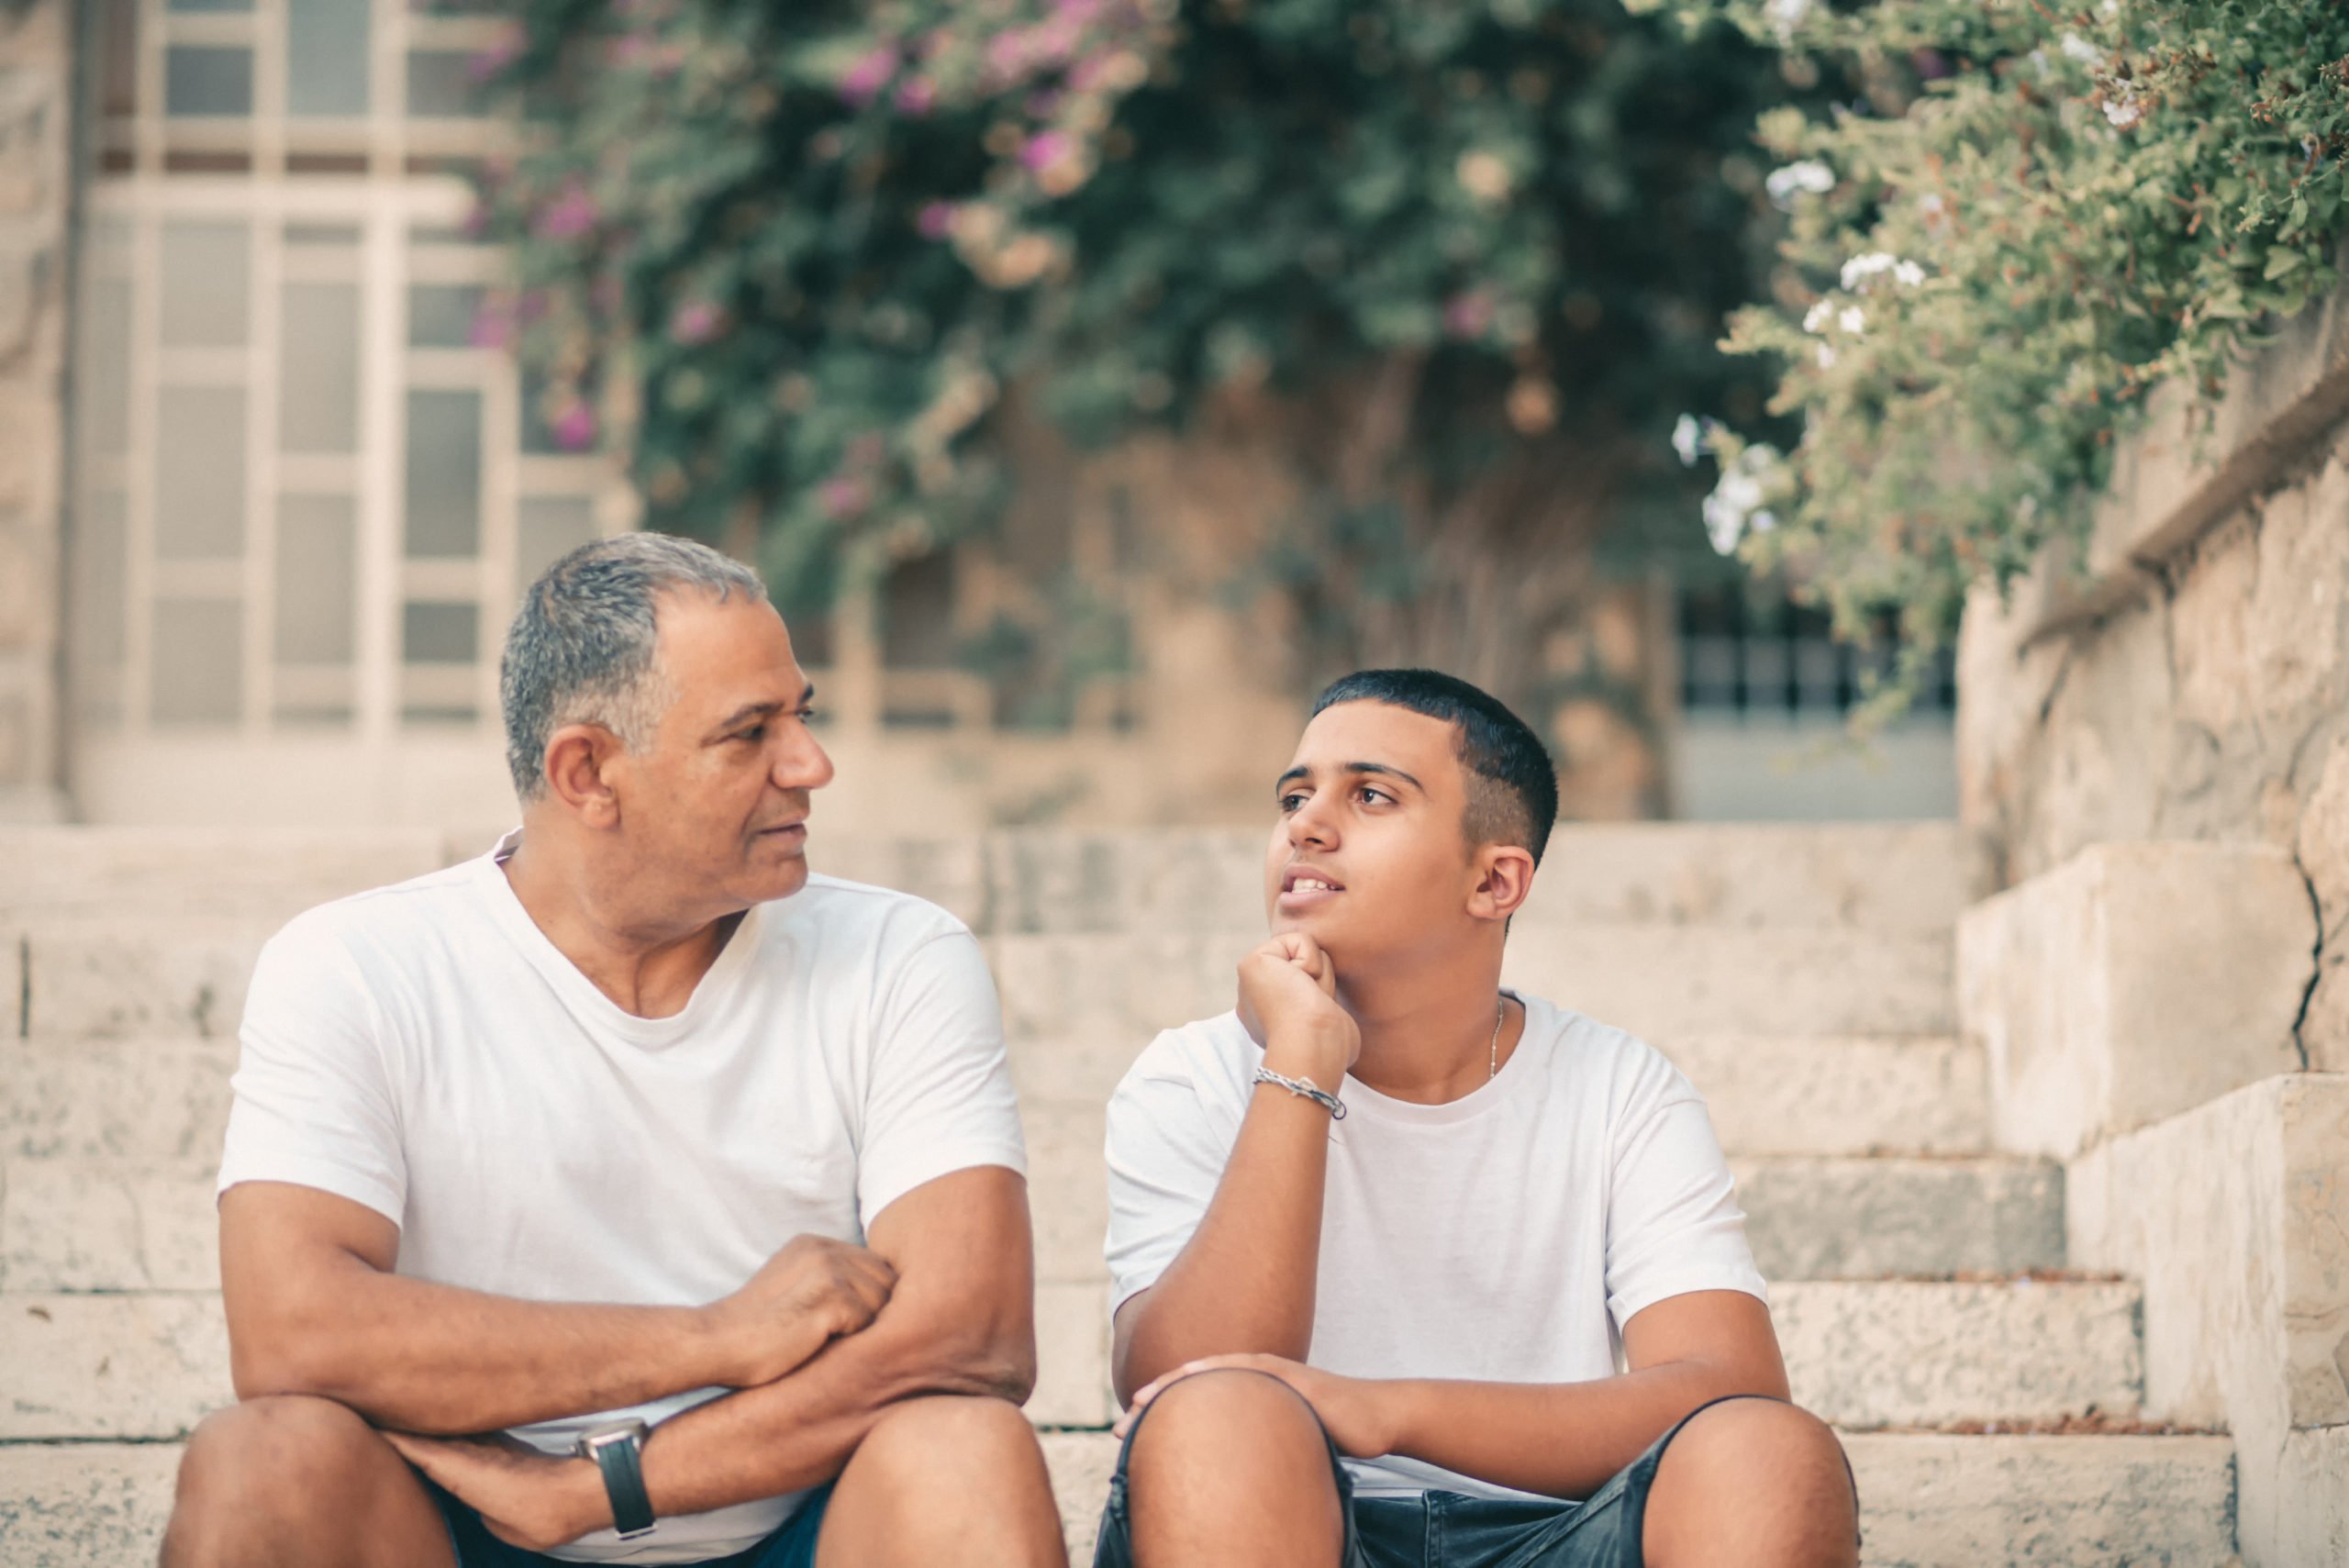 A father talking to his son while sitting on stone steps